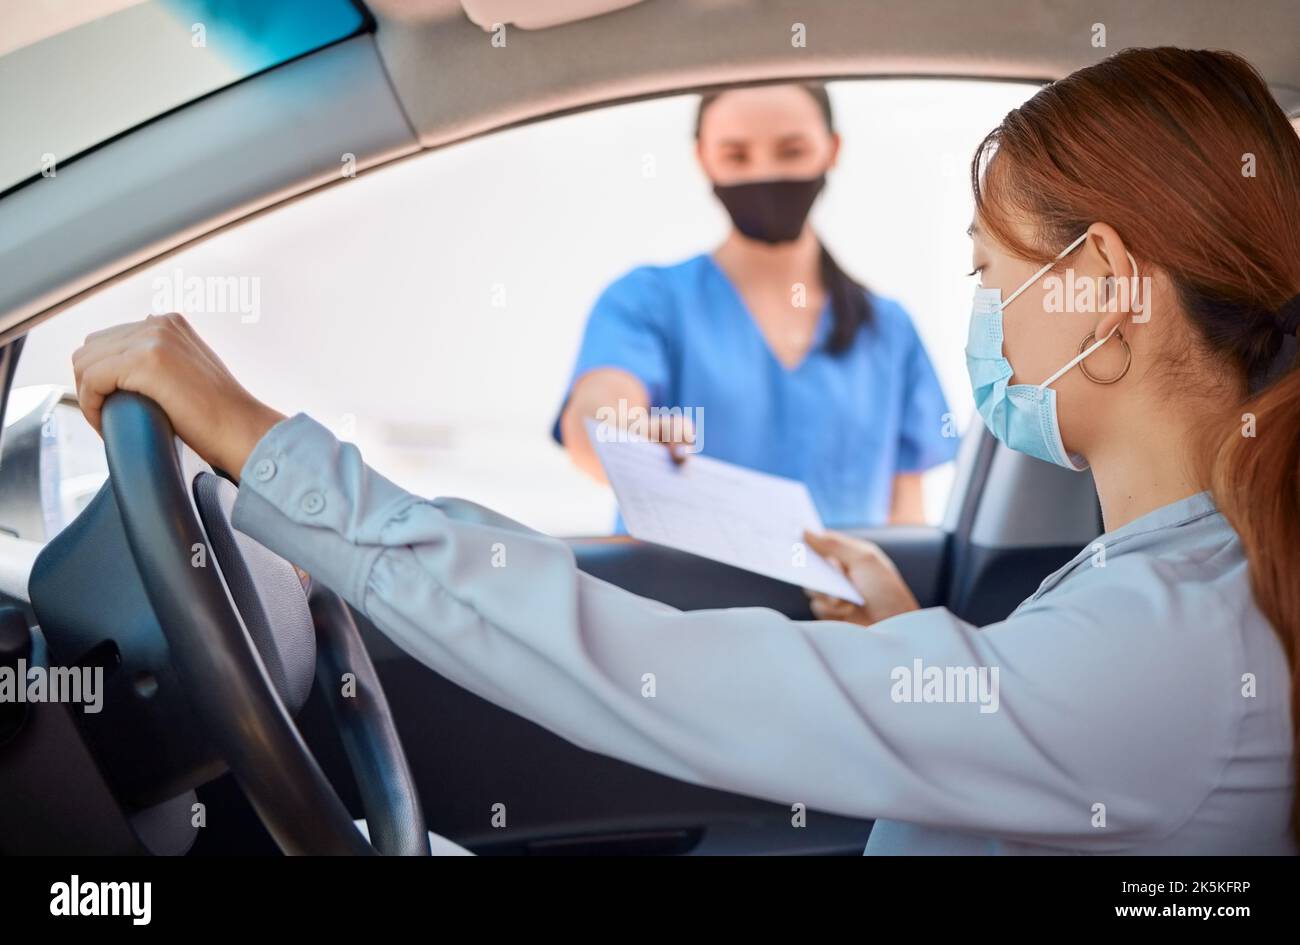 Covid test in car and drive thru, nurse giving patient forms to fill in. Woman in vehicle wearing a mask and taking documents from medical worker Stock Photo